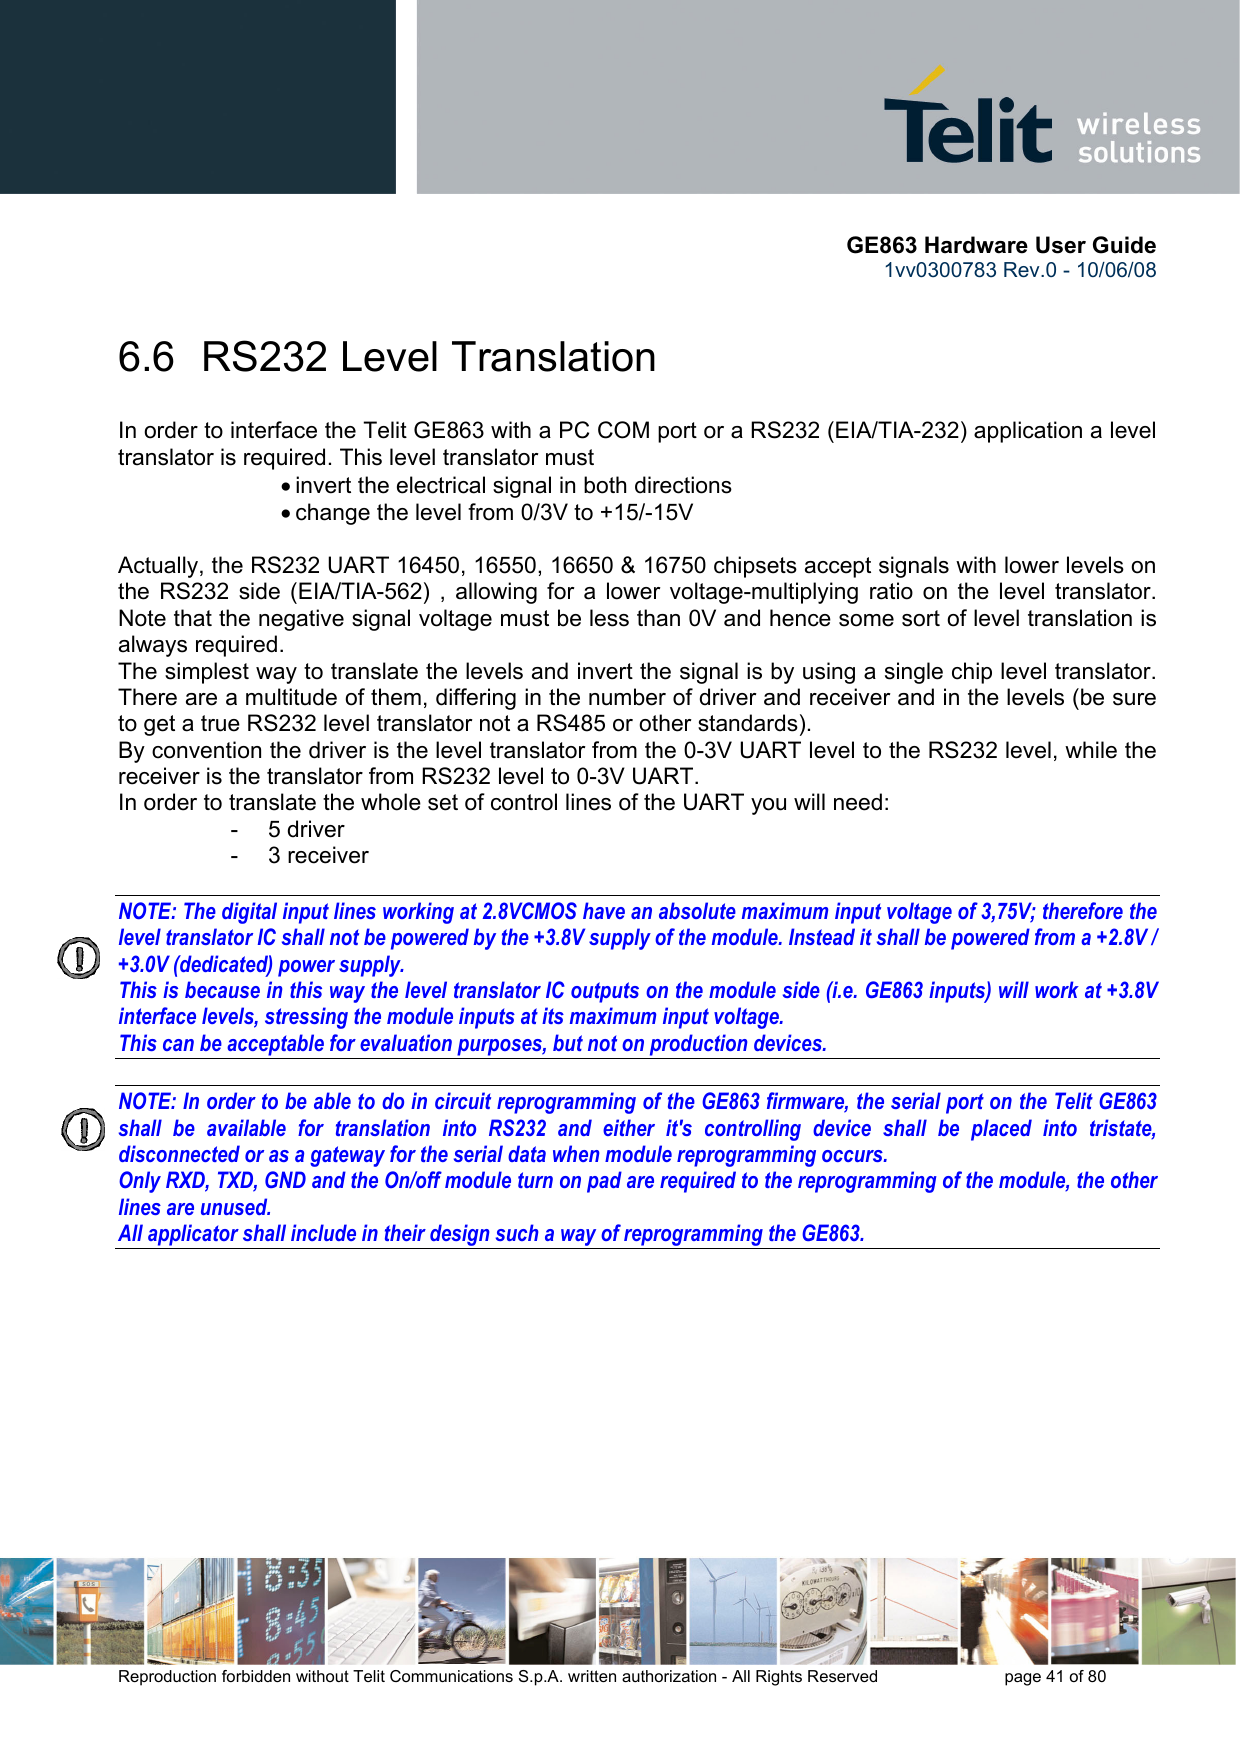       GE863 Hardware User Guide 1vv0300783 Rev.0 - 10/06/08 Reproduction forbidden without Telit Communications S.p.A. written authorization - All Rights Reserved    page 41 of 80  6.6  RS232 Level Translation In order to interface the Telit GE863 with a PC COM port or a RS232 (EIA/TIA-232) application a level translator is required. This level translator must • invert the electrical signal in both directions • change the level from 0/3V to +15/-15V   Actually, the RS232 UART 16450, 16550, 16650 &amp; 16750 chipsets accept signals with lower levels on the RS232 side (EIA/TIA-562) , allowing for a lower voltage-multiplying ratio on the level translator. Note that the negative signal voltage must be less than 0V and hence some sort of level translation is always required.  The simplest way to translate the levels and invert the signal is by using a single chip level translator. There are a multitude of them, differing in the number of driver and receiver and in the levels (be sure to get a true RS232 level translator not a RS485 or other standards). By convention the driver is the level translator from the 0-3V UART level to the RS232 level, while the receiver is the translator from RS232 level to 0-3V UART. In order to translate the whole set of control lines of the UART you will need: - 5 driver - 3 receiver  NOTE: The digital input lines working at 2.8VCMOS have an absolute maximum input voltage of 3,75V; therefore the level translator IC shall not be powered by the +3.8V supply of the module. Instead it shall be powered from a +2.8V / +3.0V (dedicated) power supply. This is because in this way the level translator IC outputs on the module side (i.e. GE863 inputs) will work at +3.8V interface levels, stressing the module inputs at its maximum input voltage. This can be acceptable for evaluation purposes, but not on production devices.  NOTE: In order to be able to do in circuit reprogramming of the GE863 firmware, the serial port on the Telit GE863 shall be available for translation into RS232 and either it&apos;s controlling device shall be placed into tristate, disconnected or as a gateway for the serial data when module reprogramming occurs. Only RXD, TXD, GND and the On/off module turn on pad are required to the reprogramming of the module, the other lines are unused. All applicator shall include in their design such a way of reprogramming the GE863.     